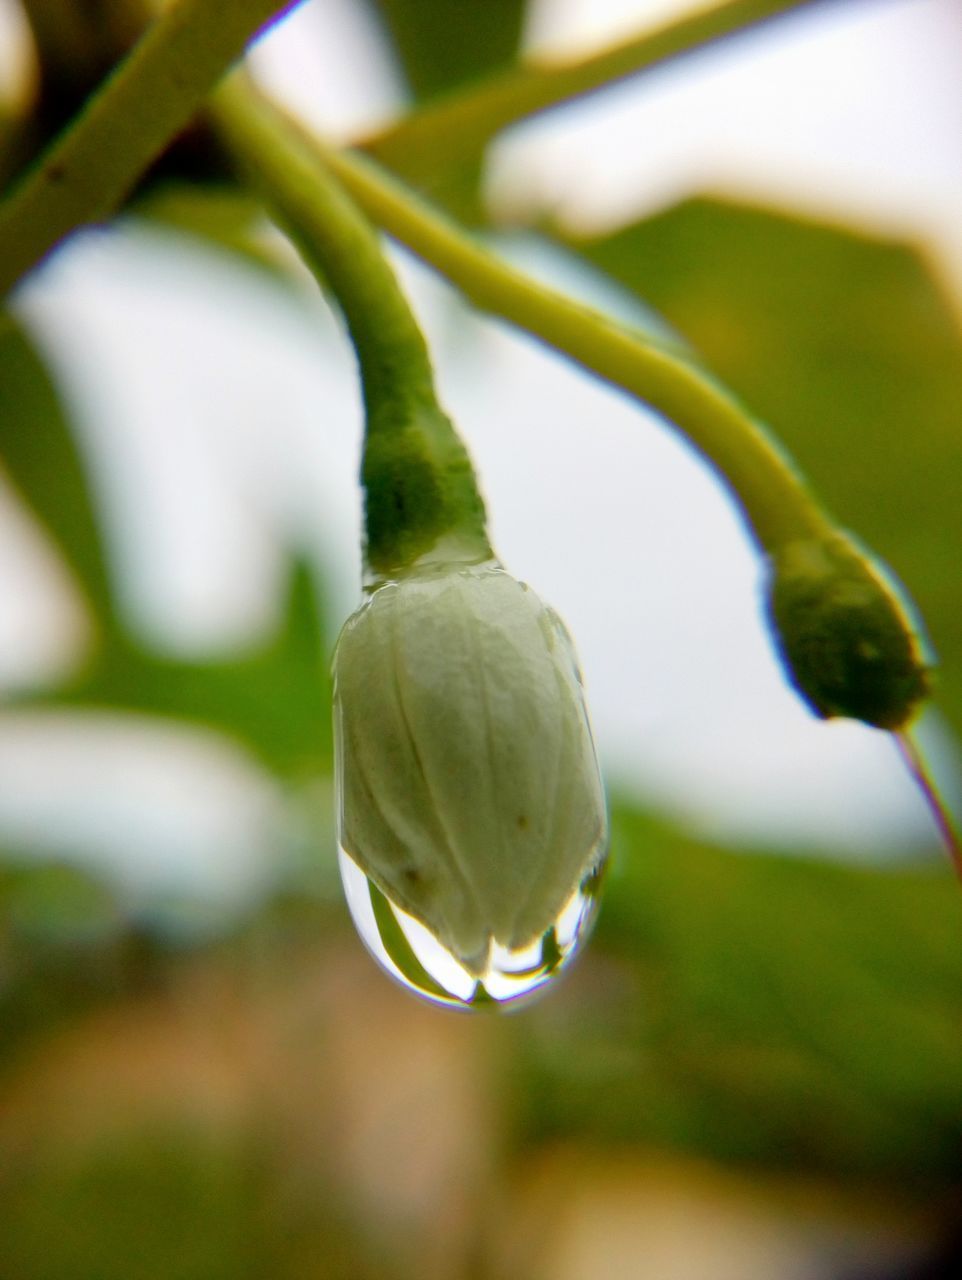 CLOSE-UP OF WATER DROP ON PLANT